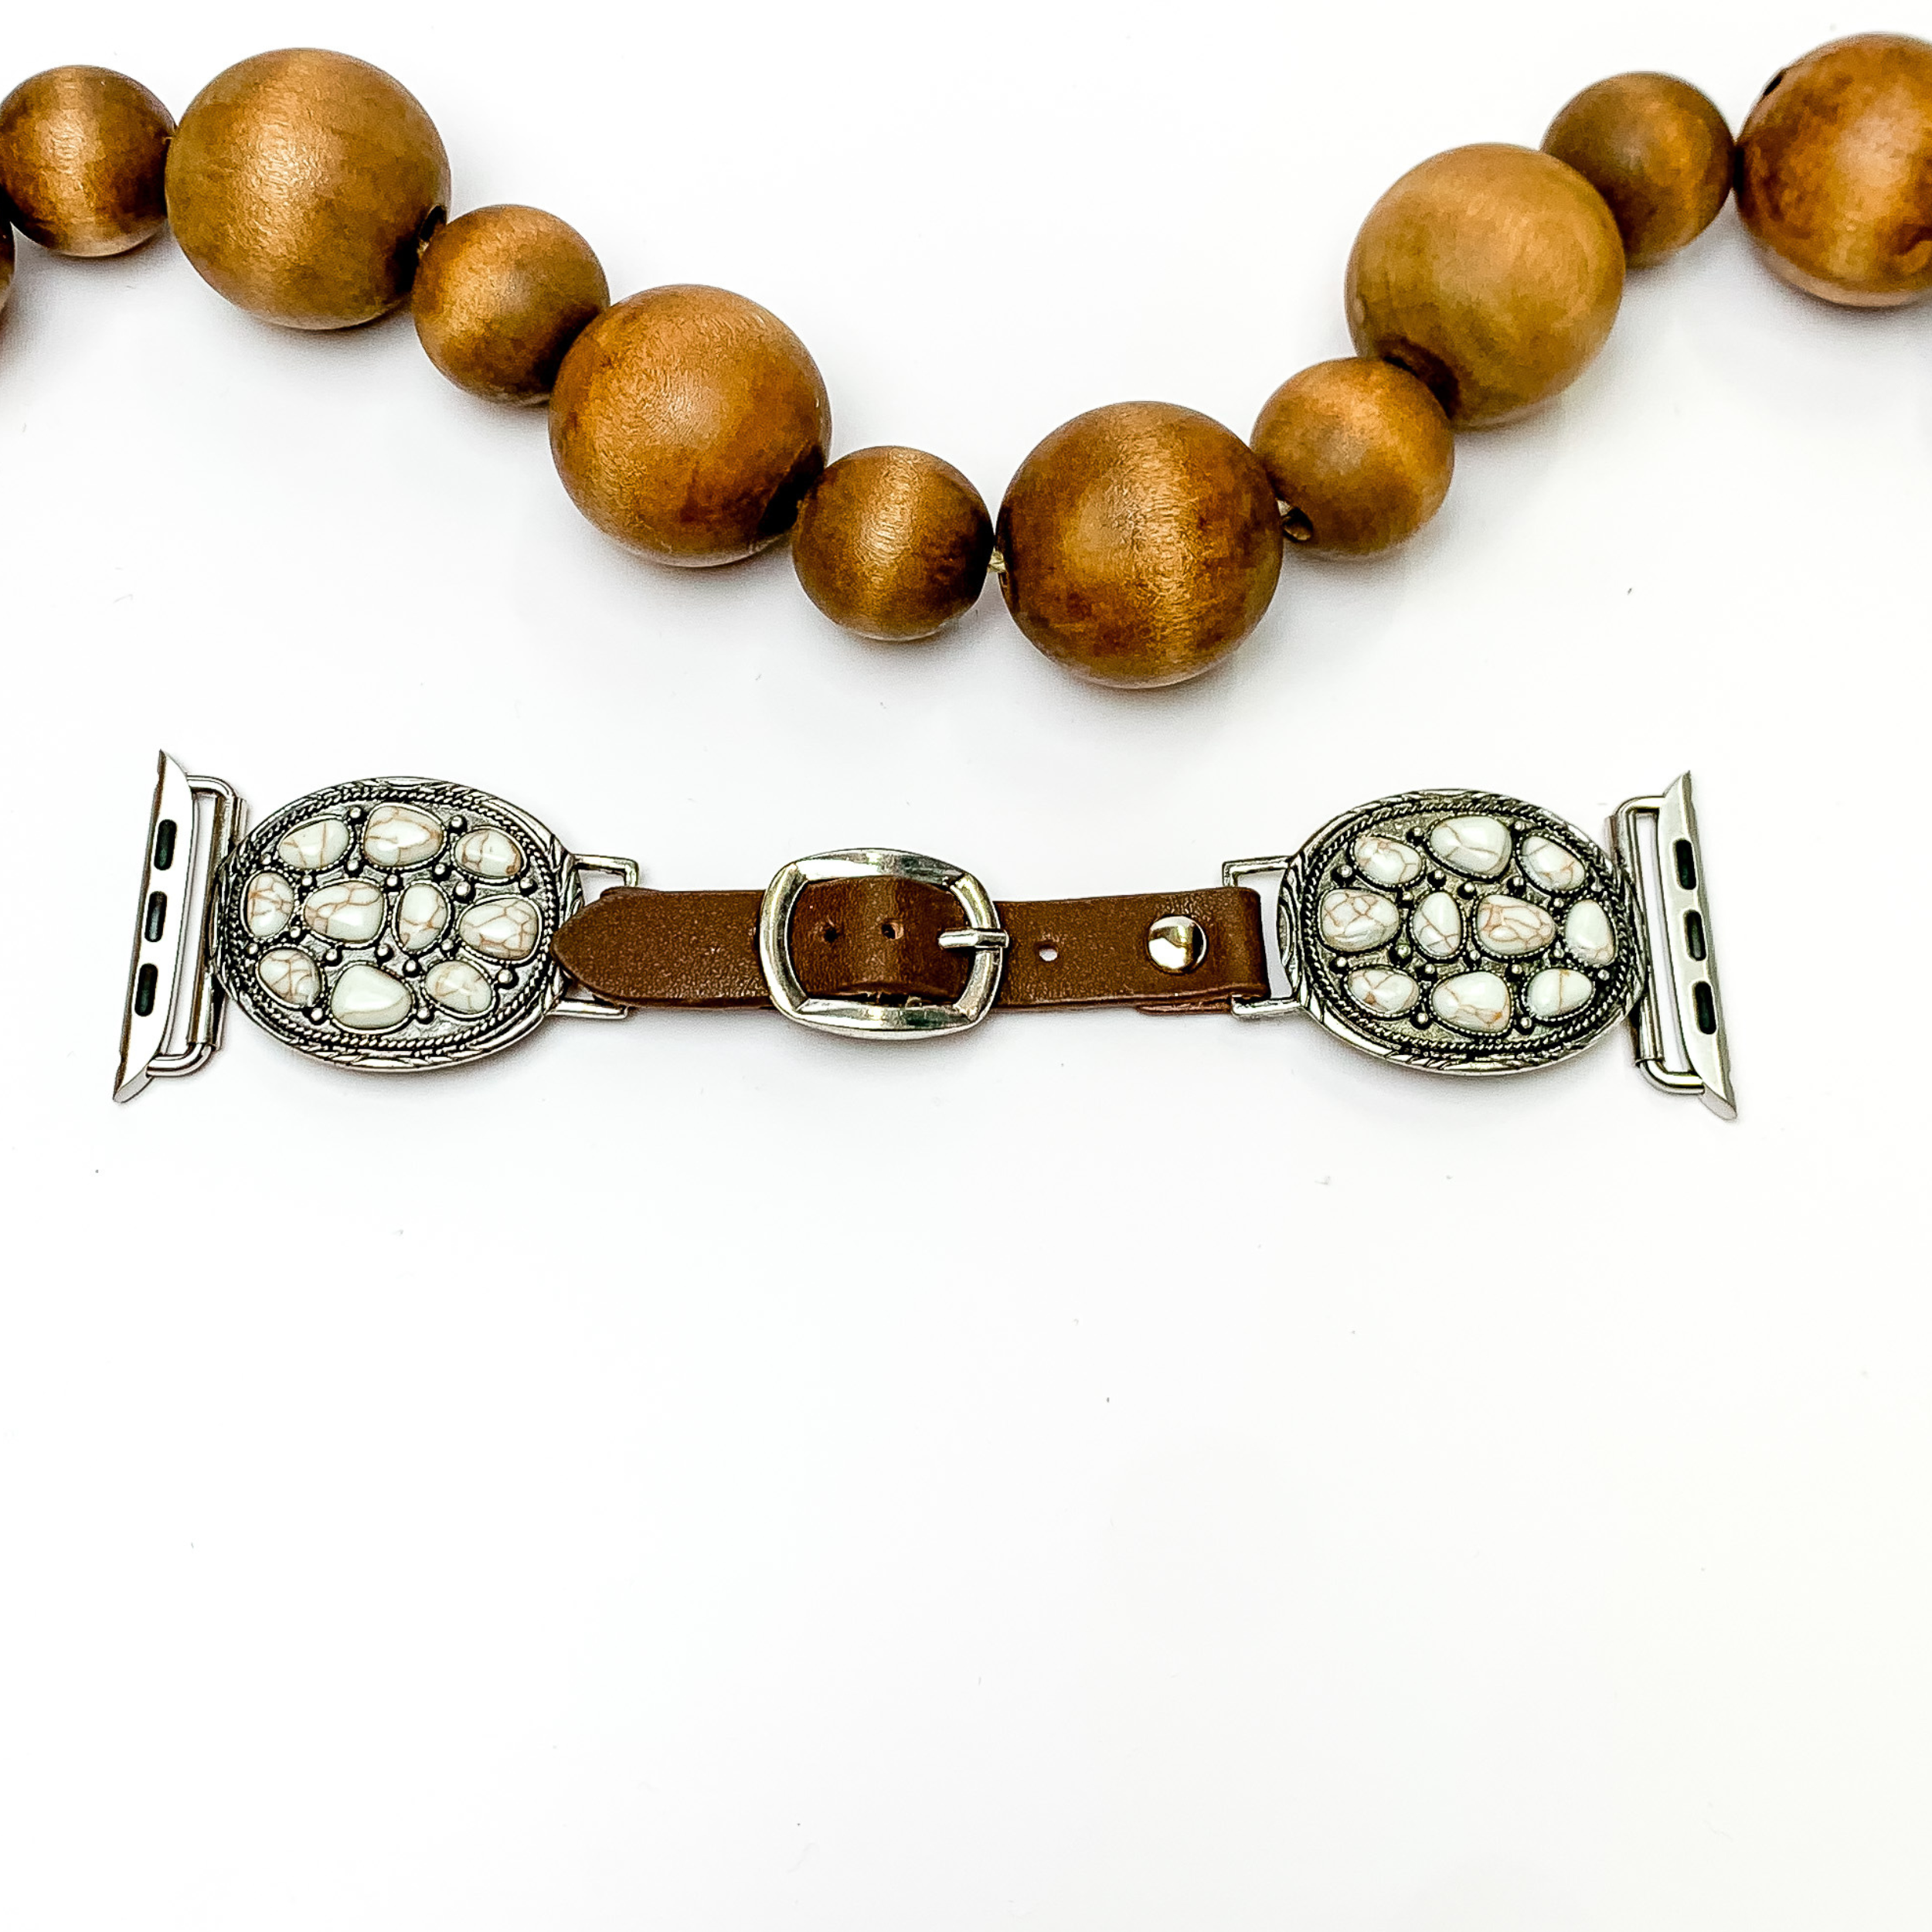 Brown smart watch band with s cluster of white stones in each side. The smart watch has to oval shape silver pendants and in each one there is a cluster of white stones in a circle. The watch is pictured on a white background with wooden beads above the watch.